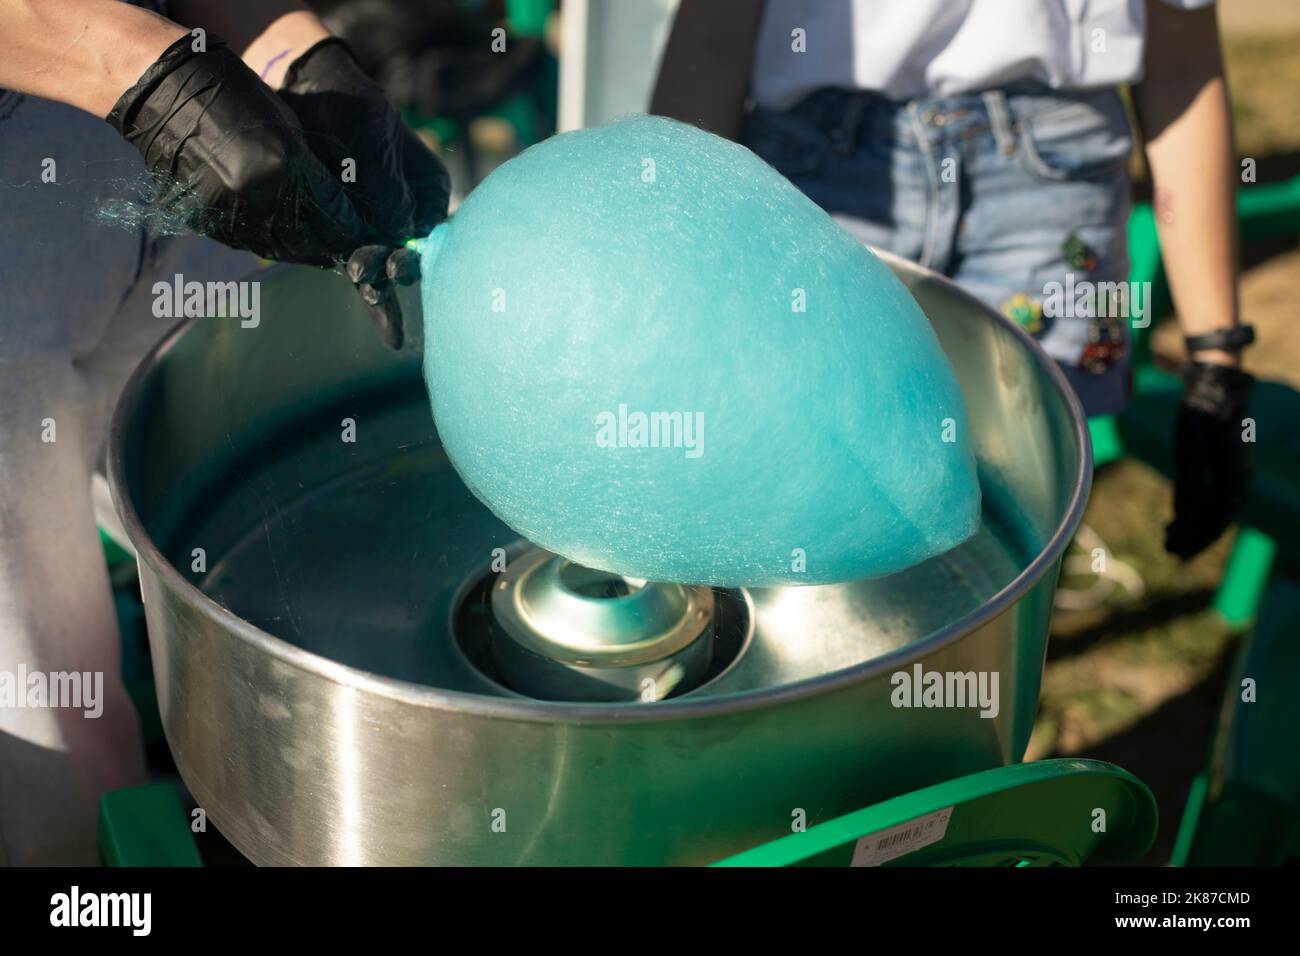 Cotton candy outside. Blue cotton candy on stick. Sugar product. Delicious food. Details of preparing treat. Stock Photo